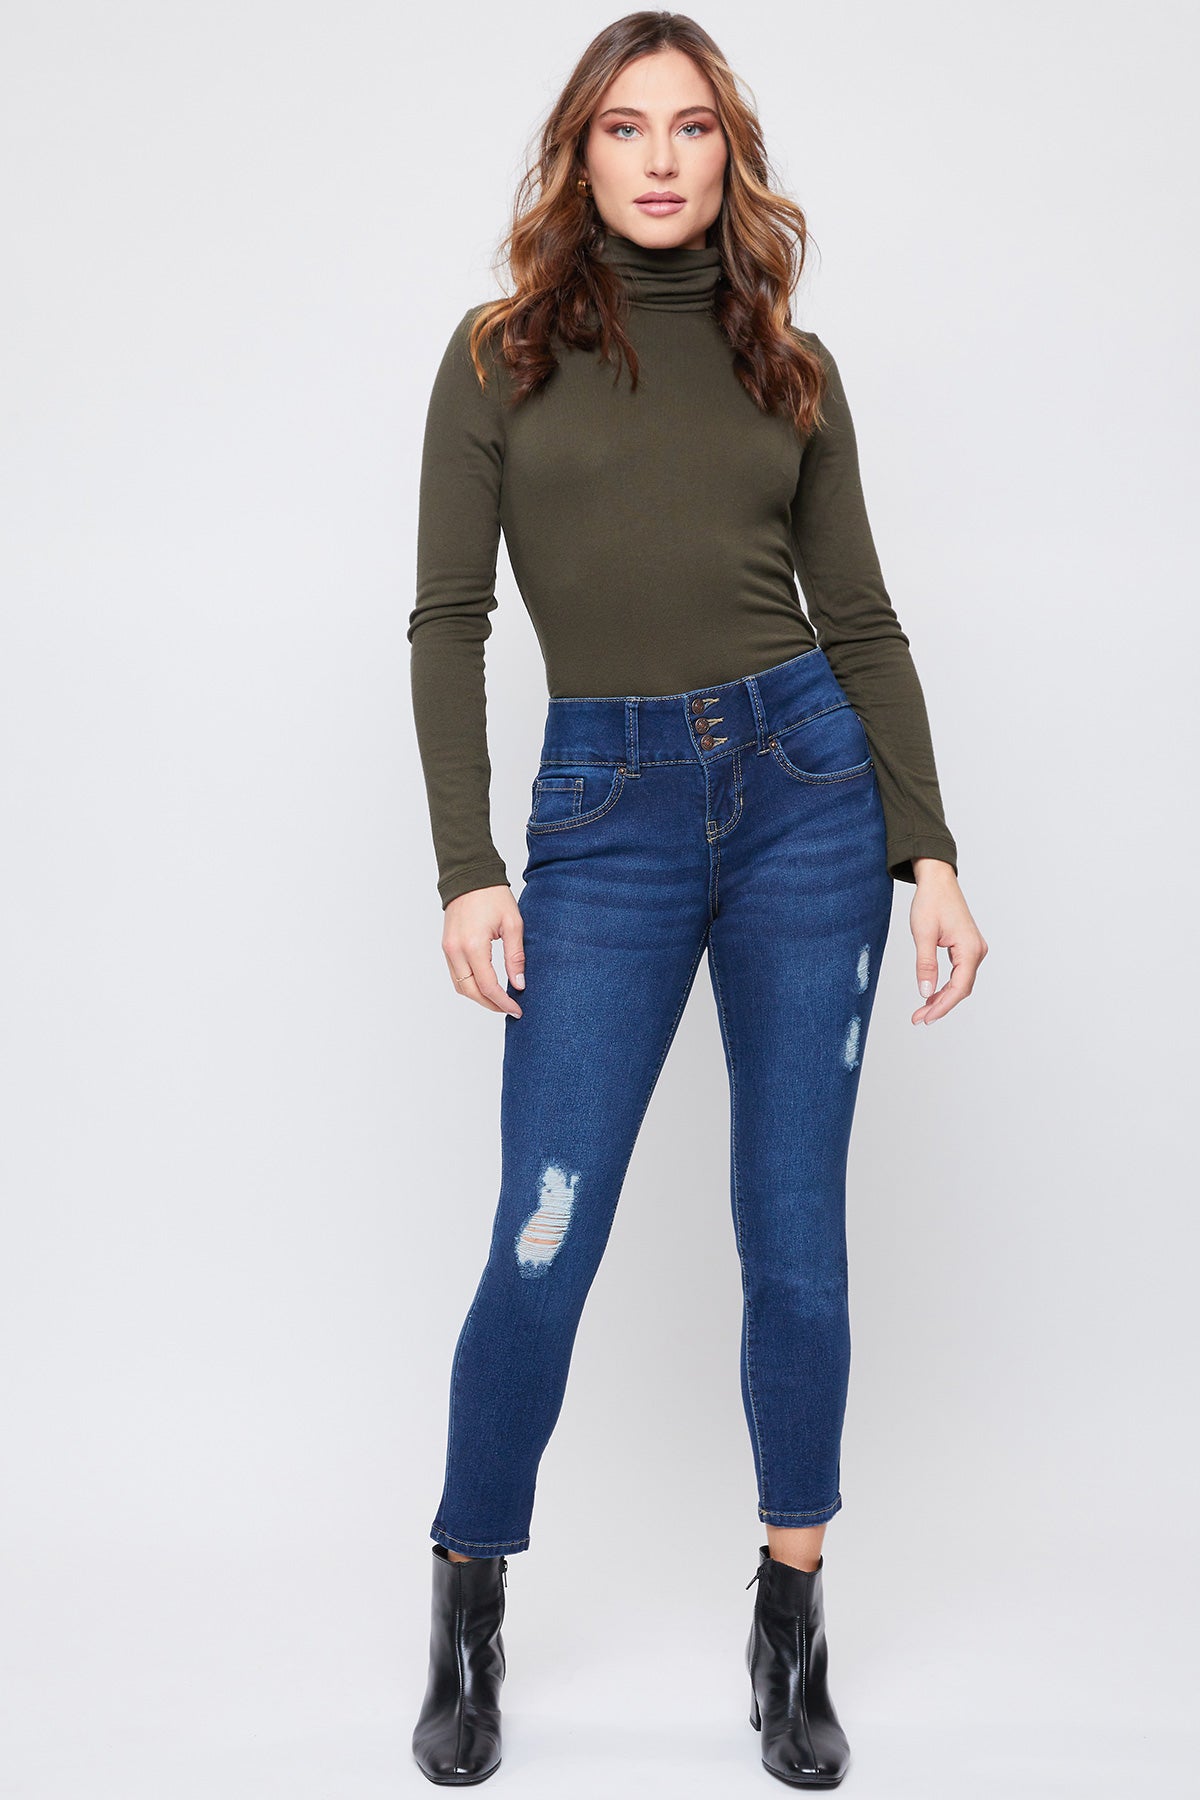 Missy Petite 3 Button High-Rise Skinny Jean 12 Pack